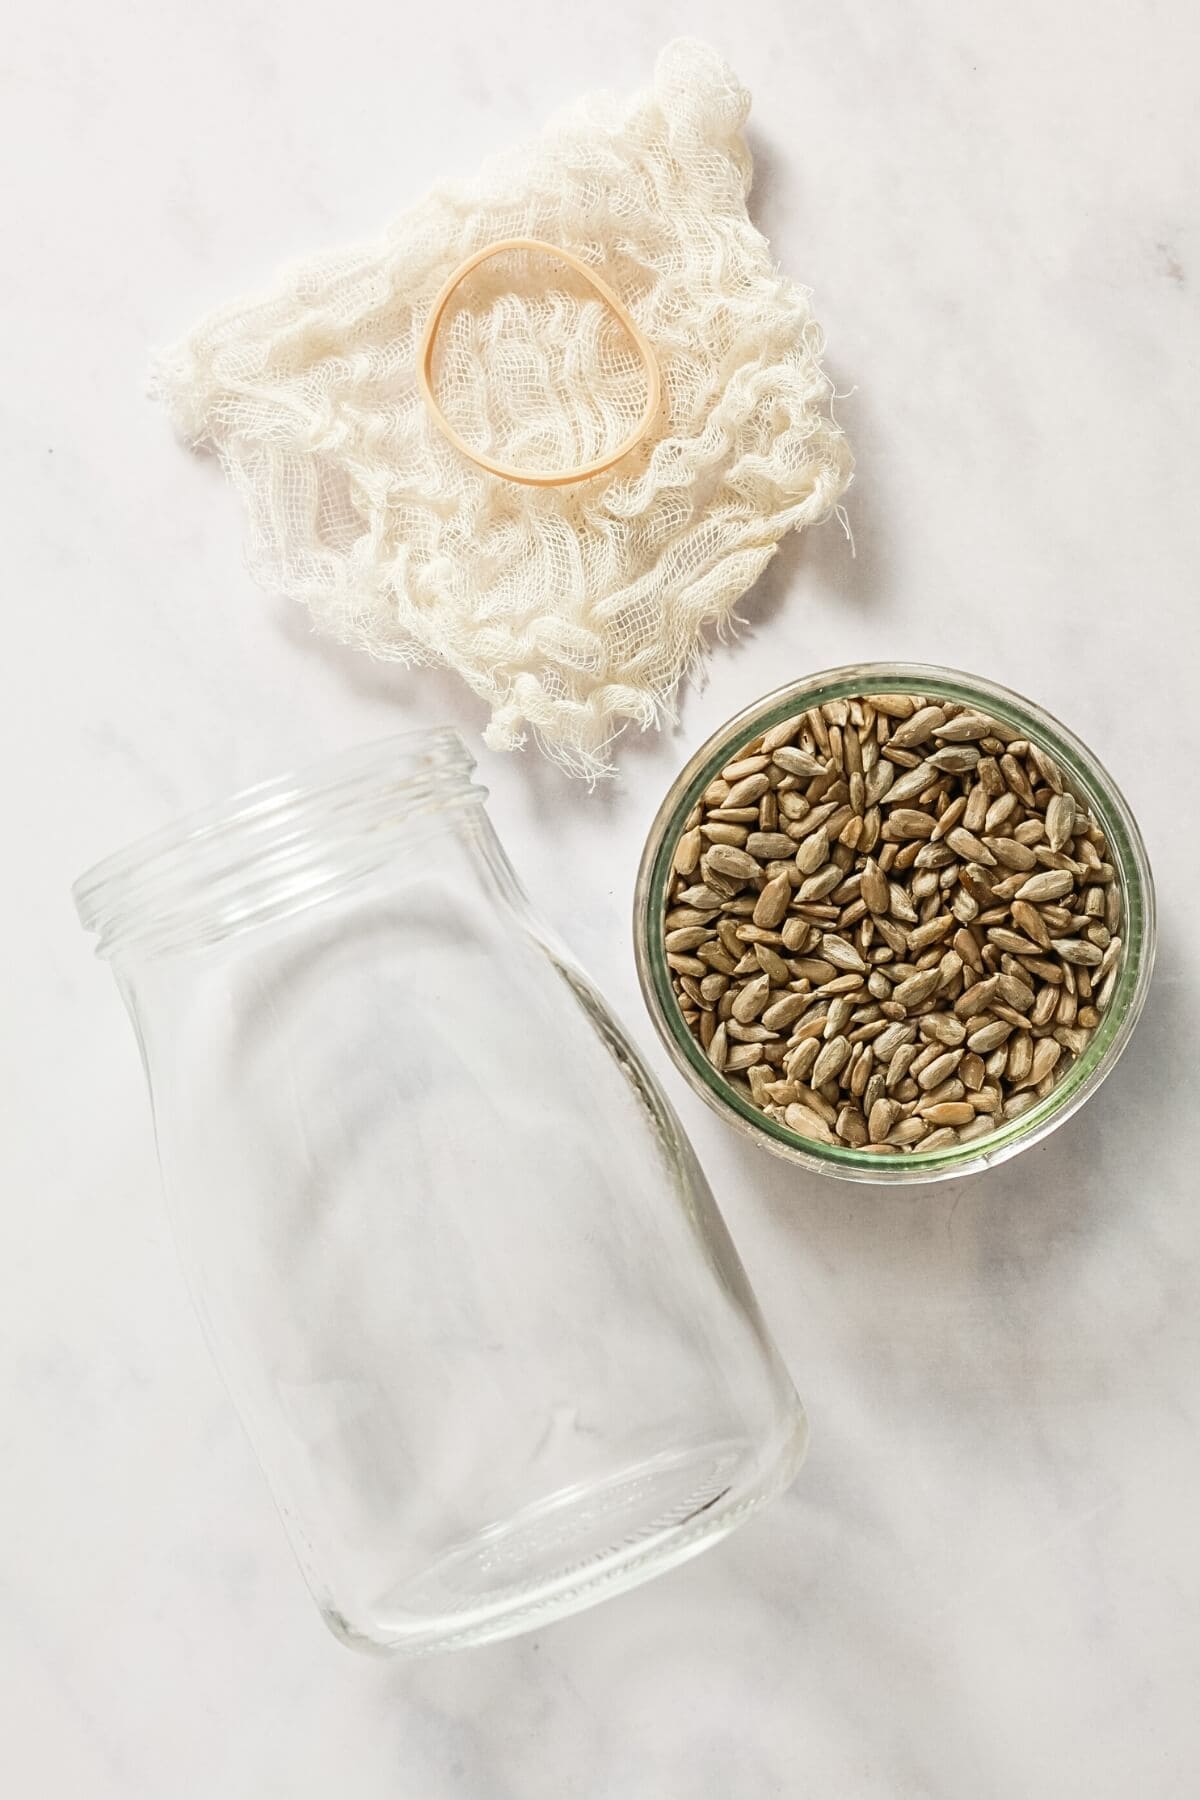 A small dish of sunflower seeds, glass jar, piece of cheesecloth and rubber band on a marble worksurface.